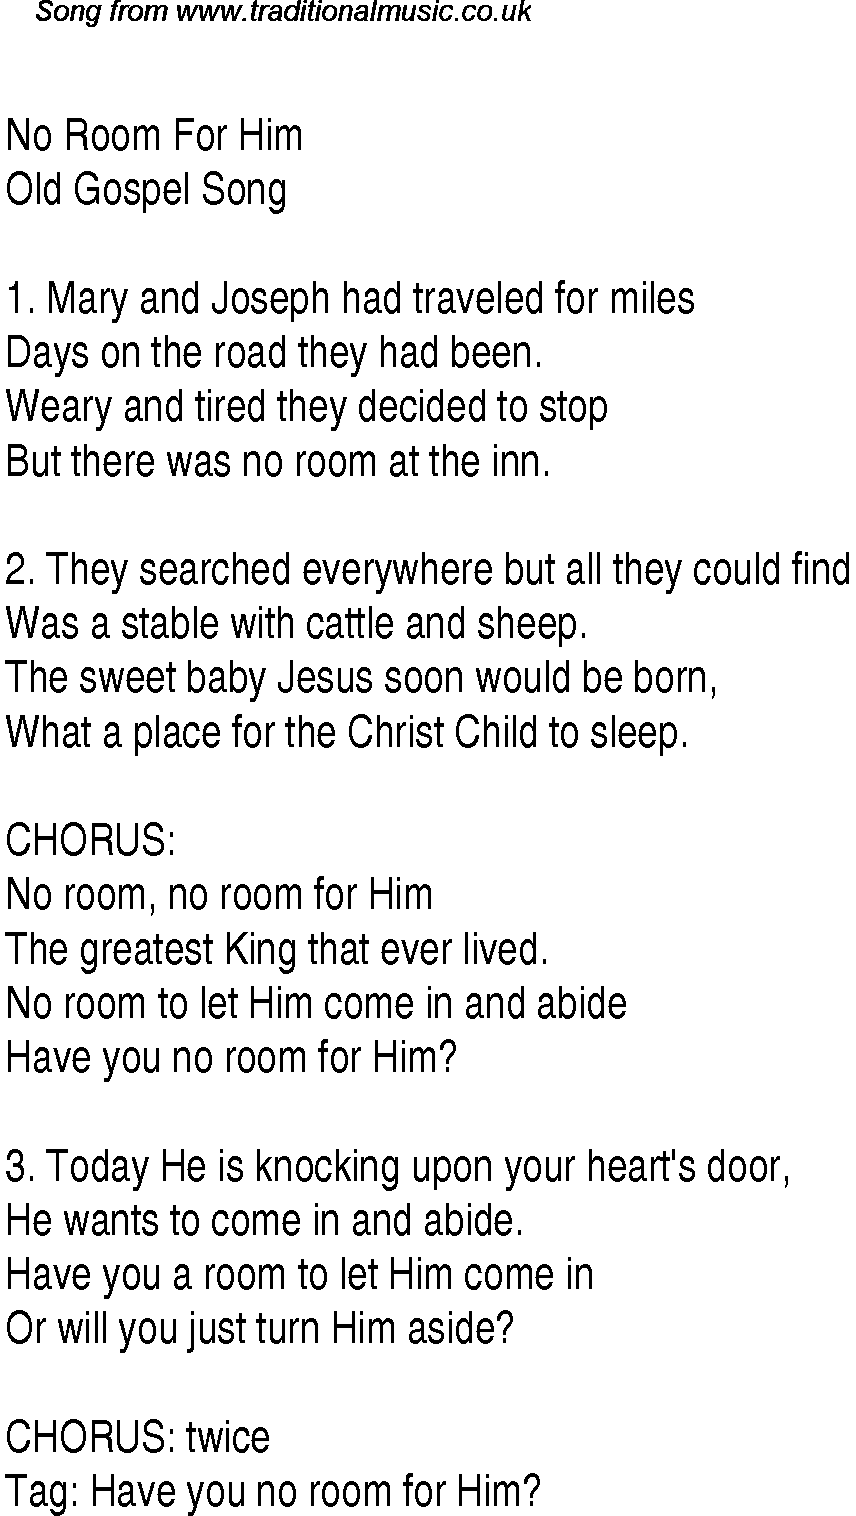 Gospel Song: no-room-for-him, lyrics and chords.